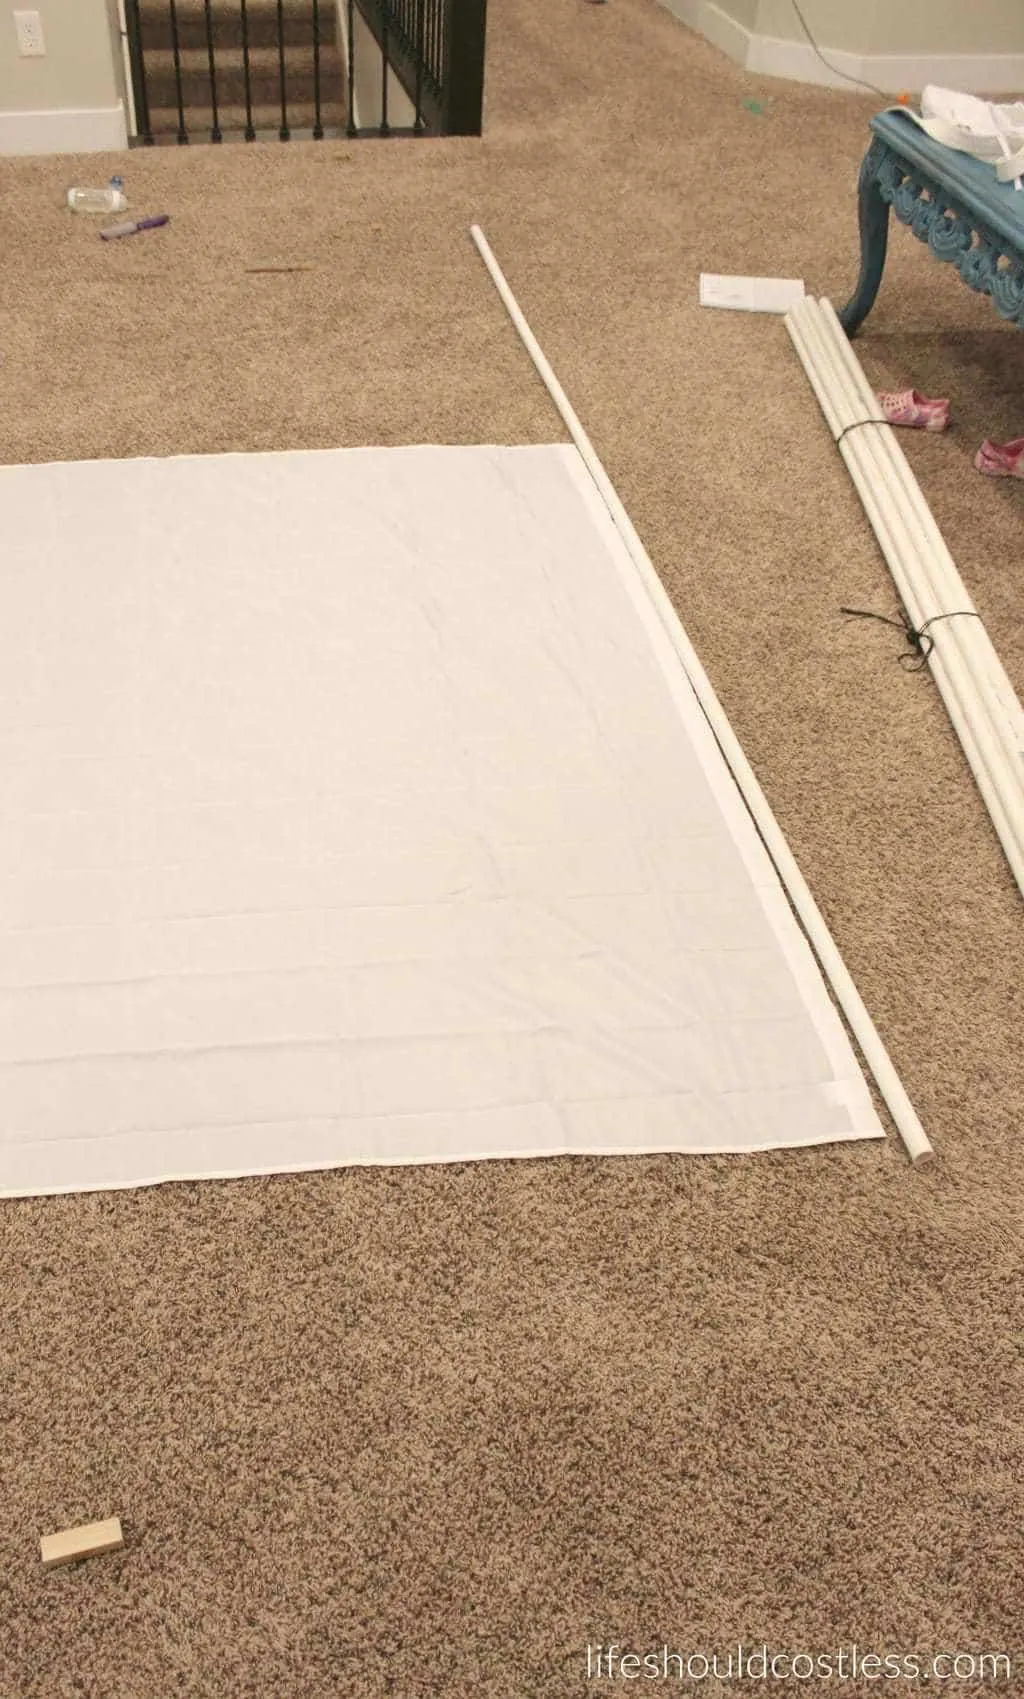 Multi-Use PVC Theater with washable and glow-in-the-dark backdrop options. The "thneed" of PVC theaters! It is so veratile that you can do almost anything. Best PVC project for kids. Showing where to make the first cut.